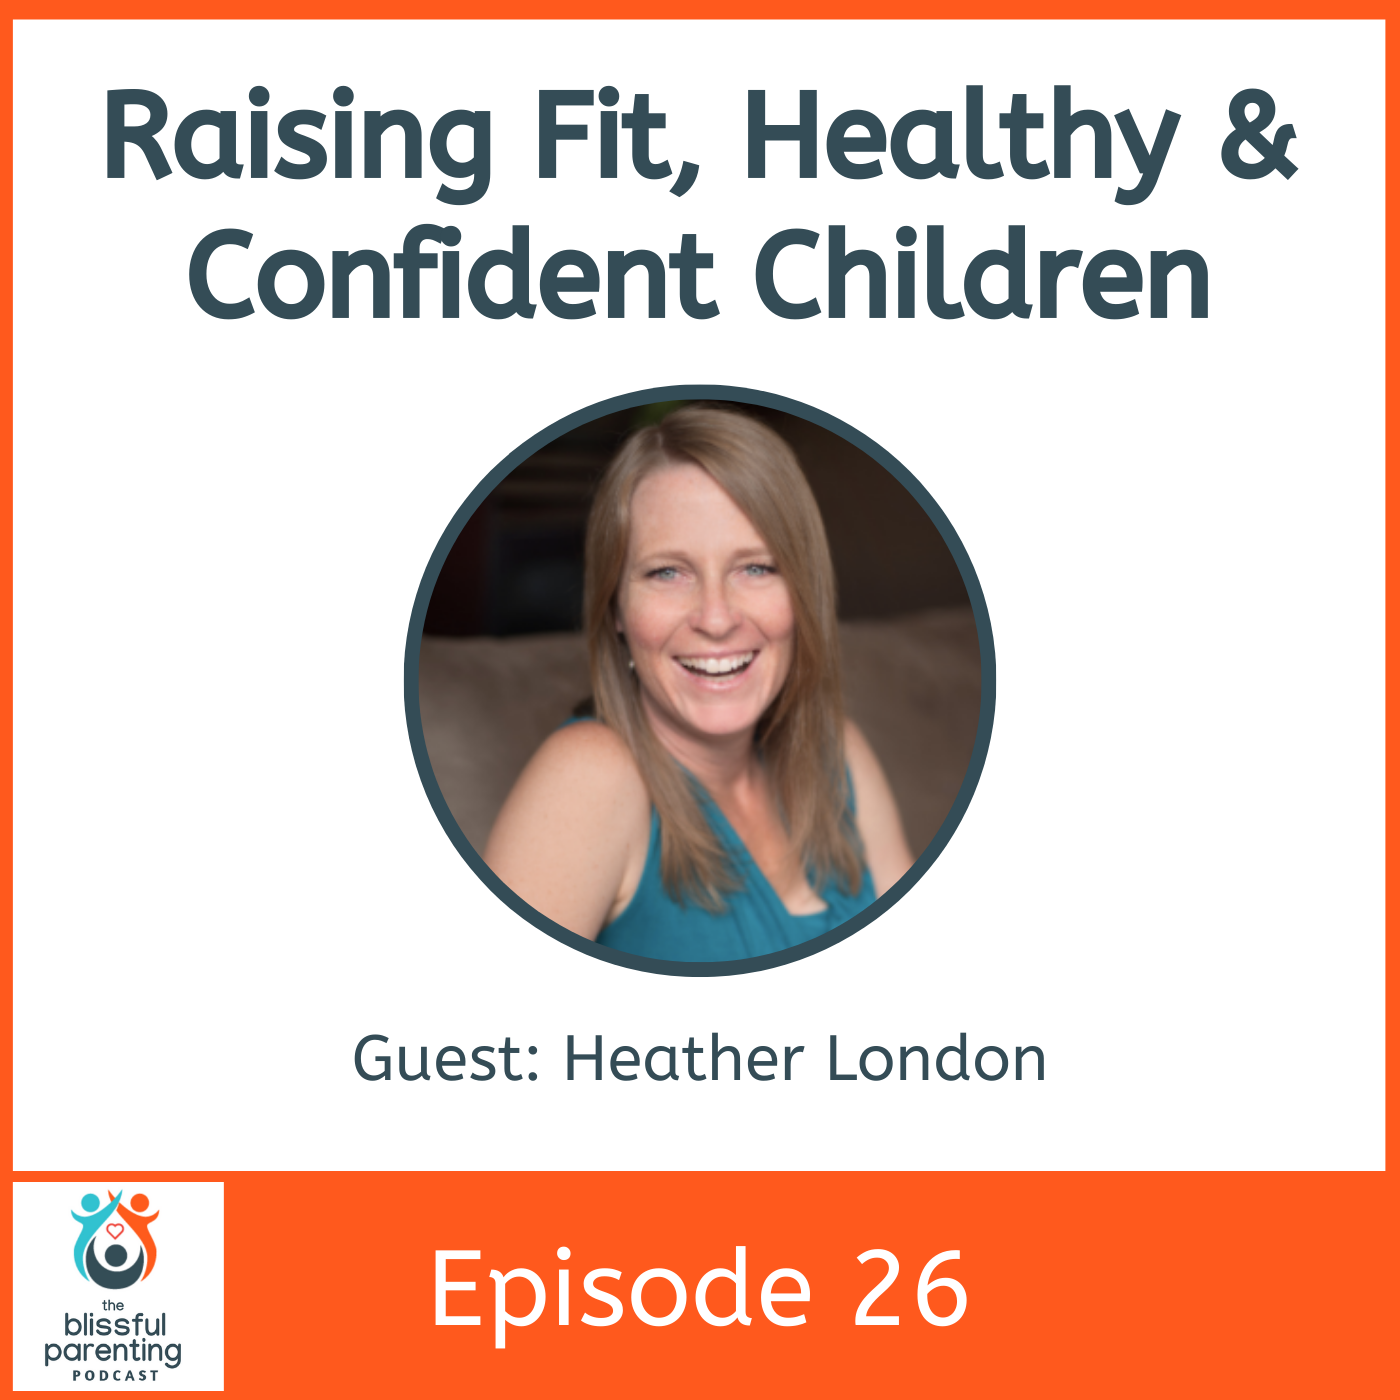 Episode image for Raising Fit, Healthy & Confident Children with Heather London